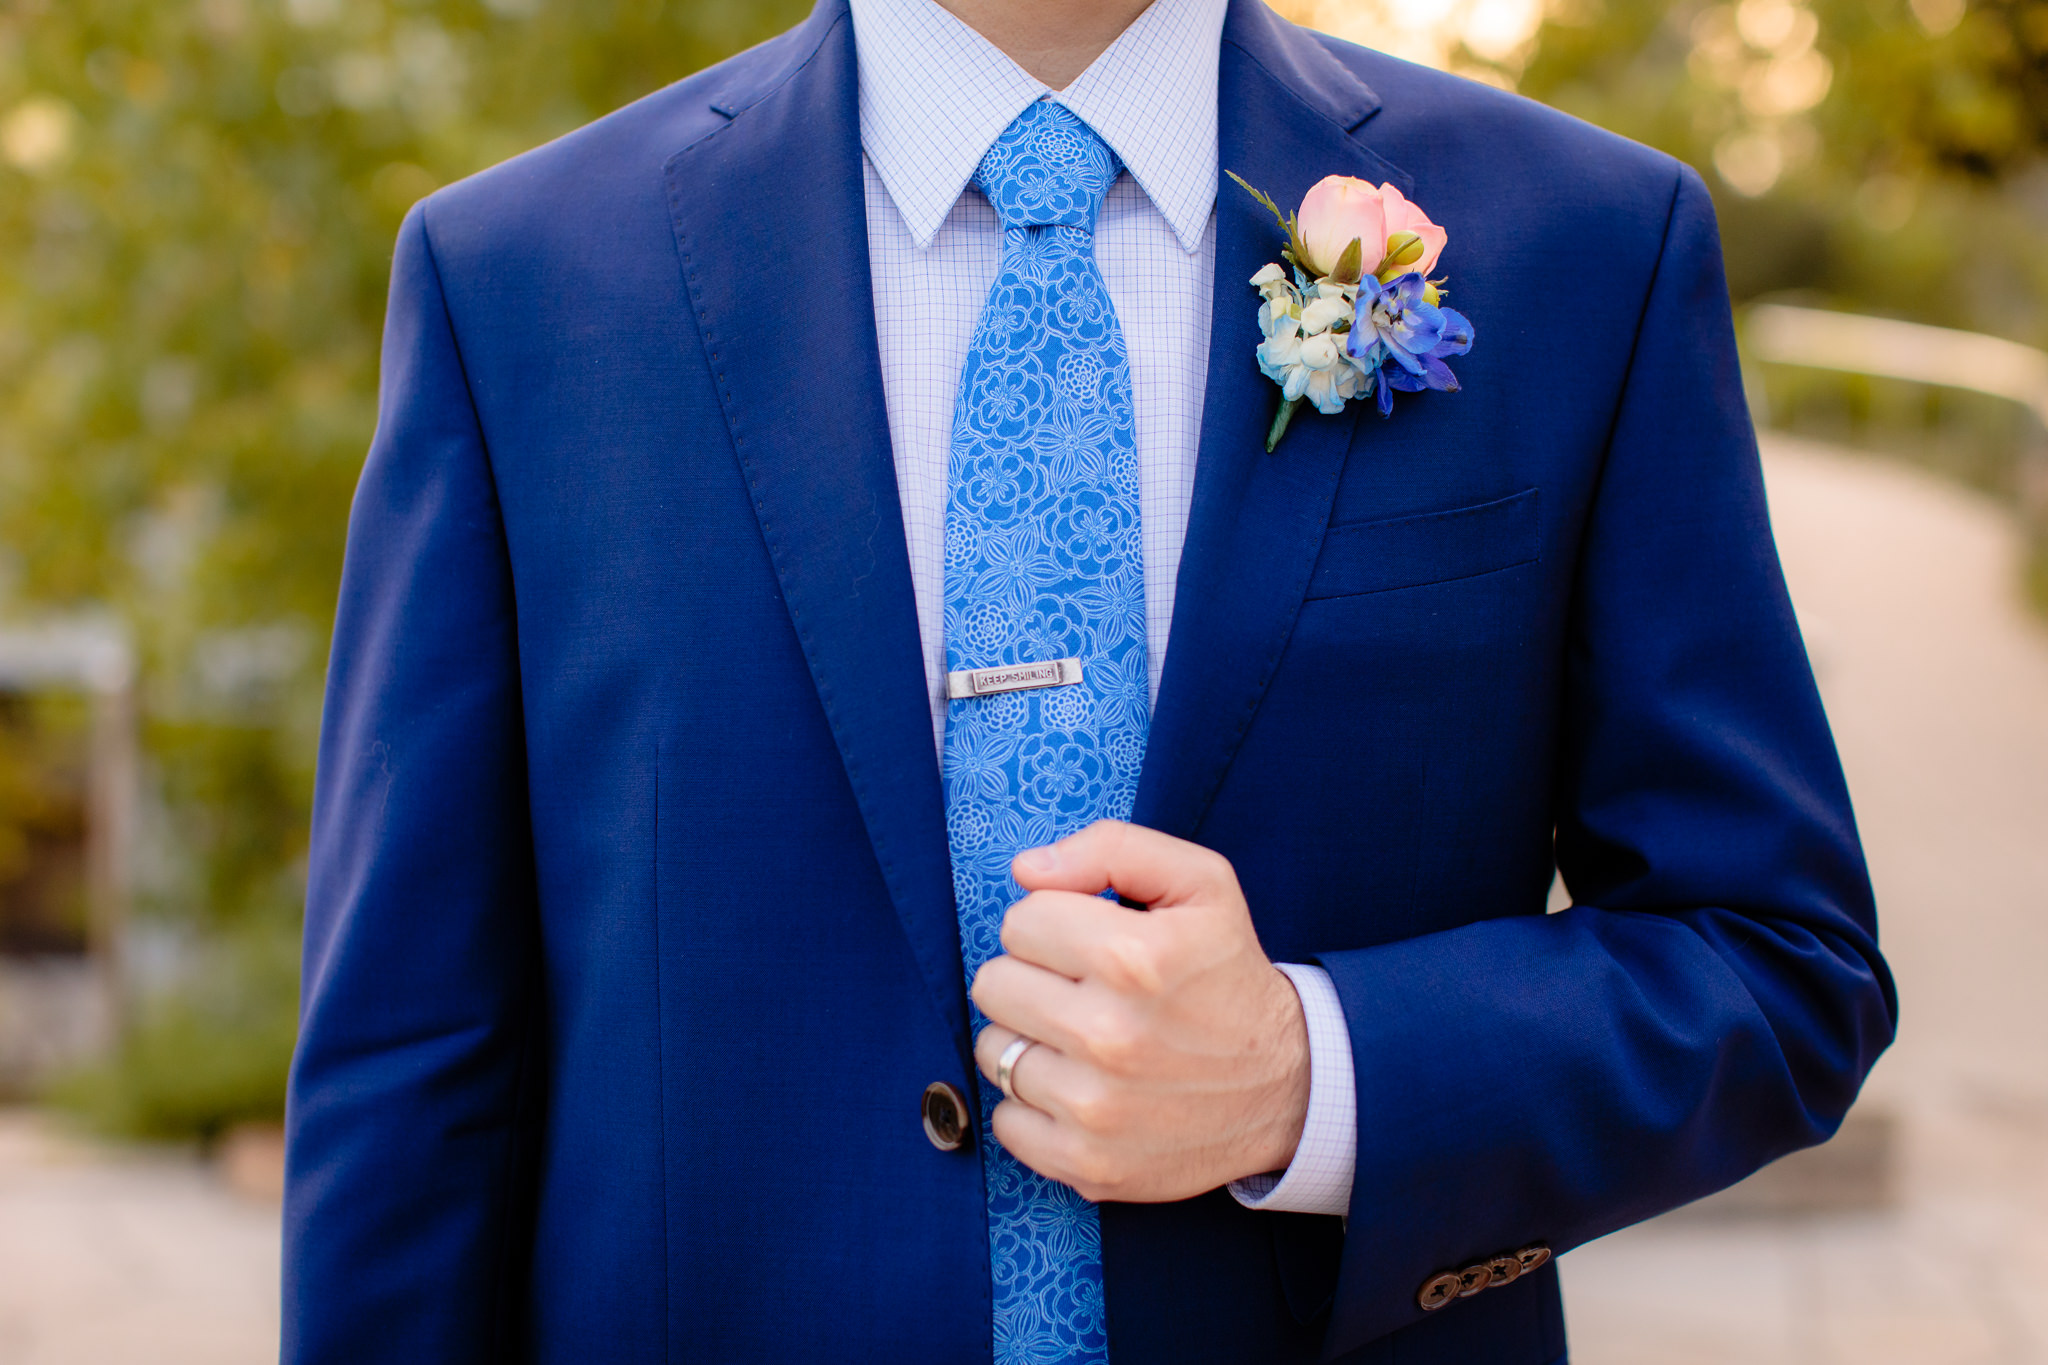 Groom's custom blue suit by Joseph Orlando Clothiers and a floral boutonniere by Hepatica